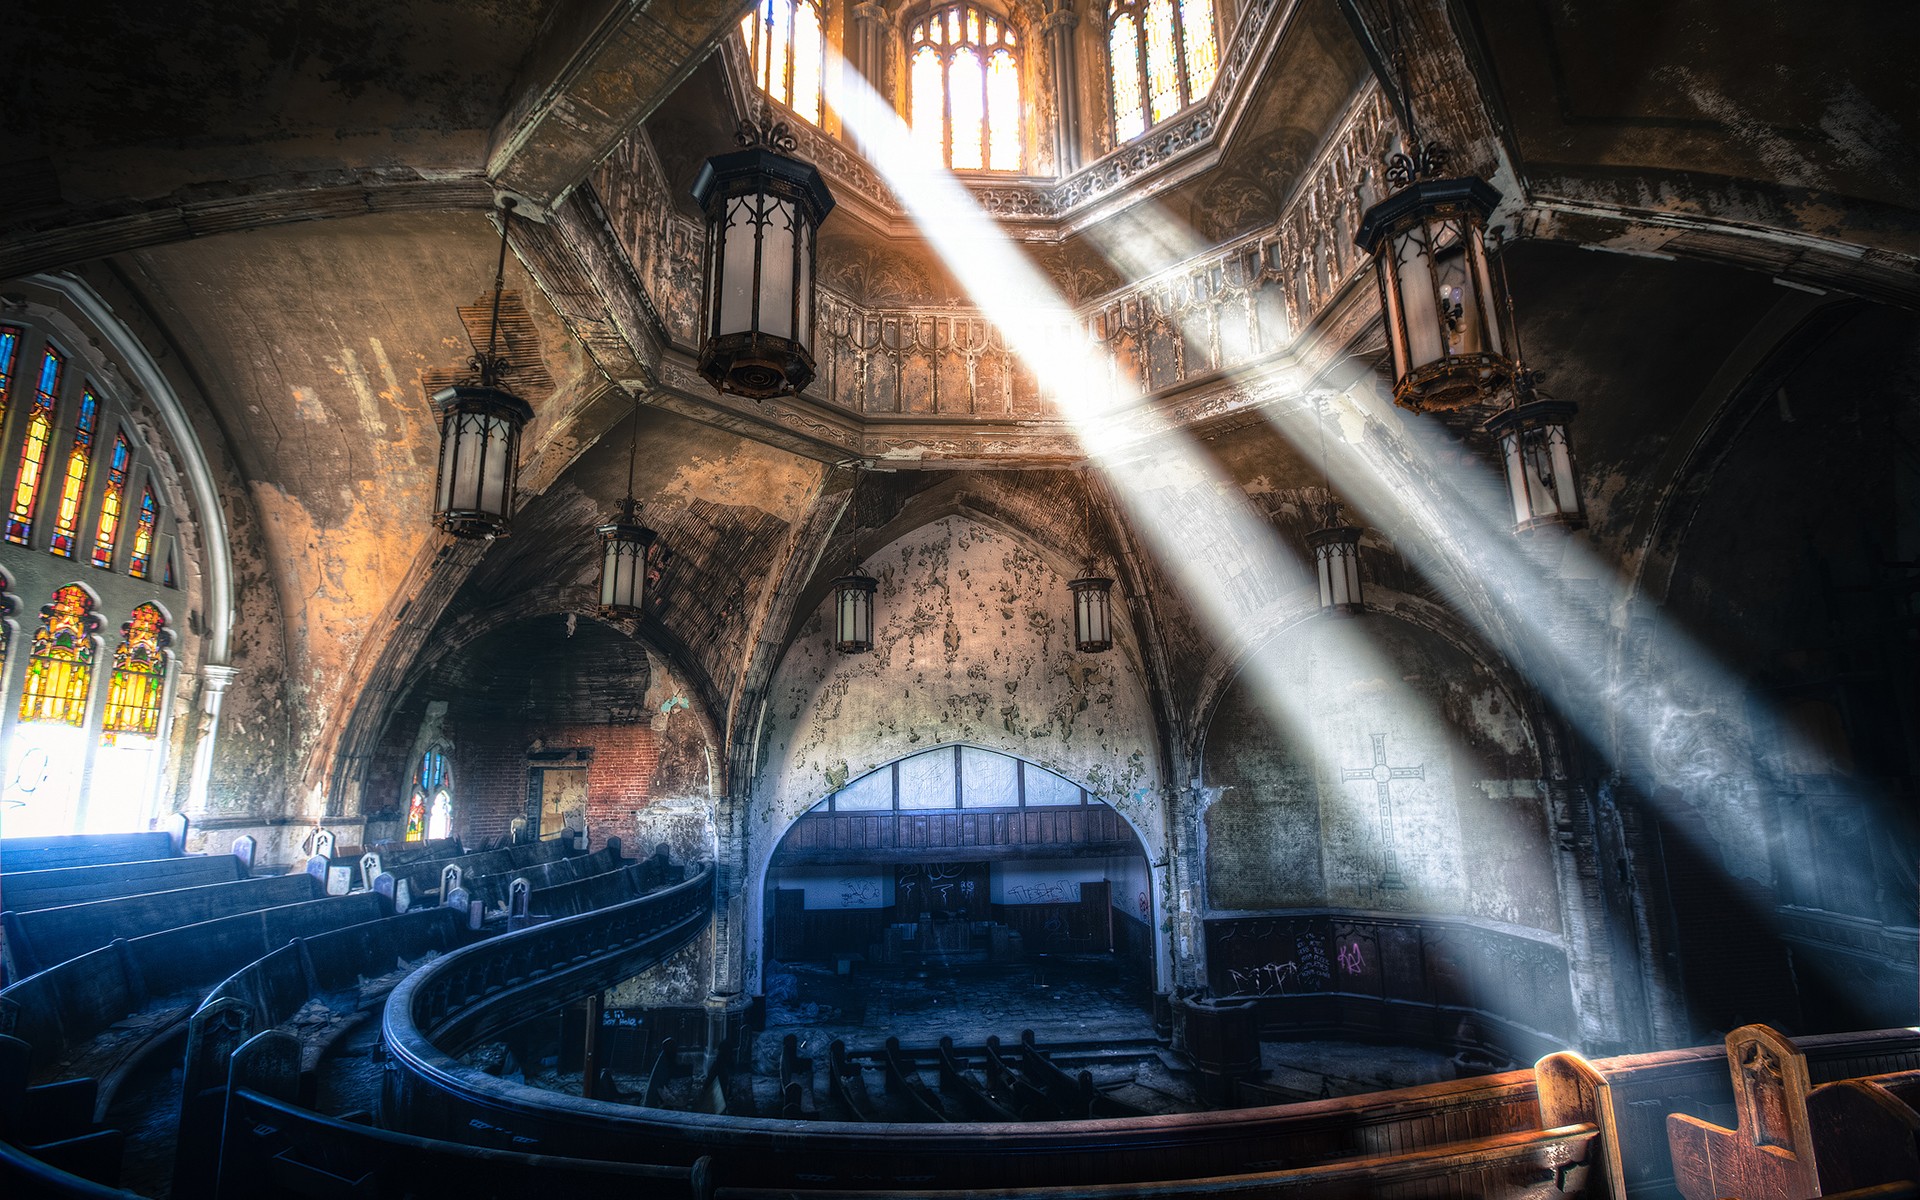 theatre, religious, church, abandoned, architecture, ruin, stained glass, sunbeam, churches